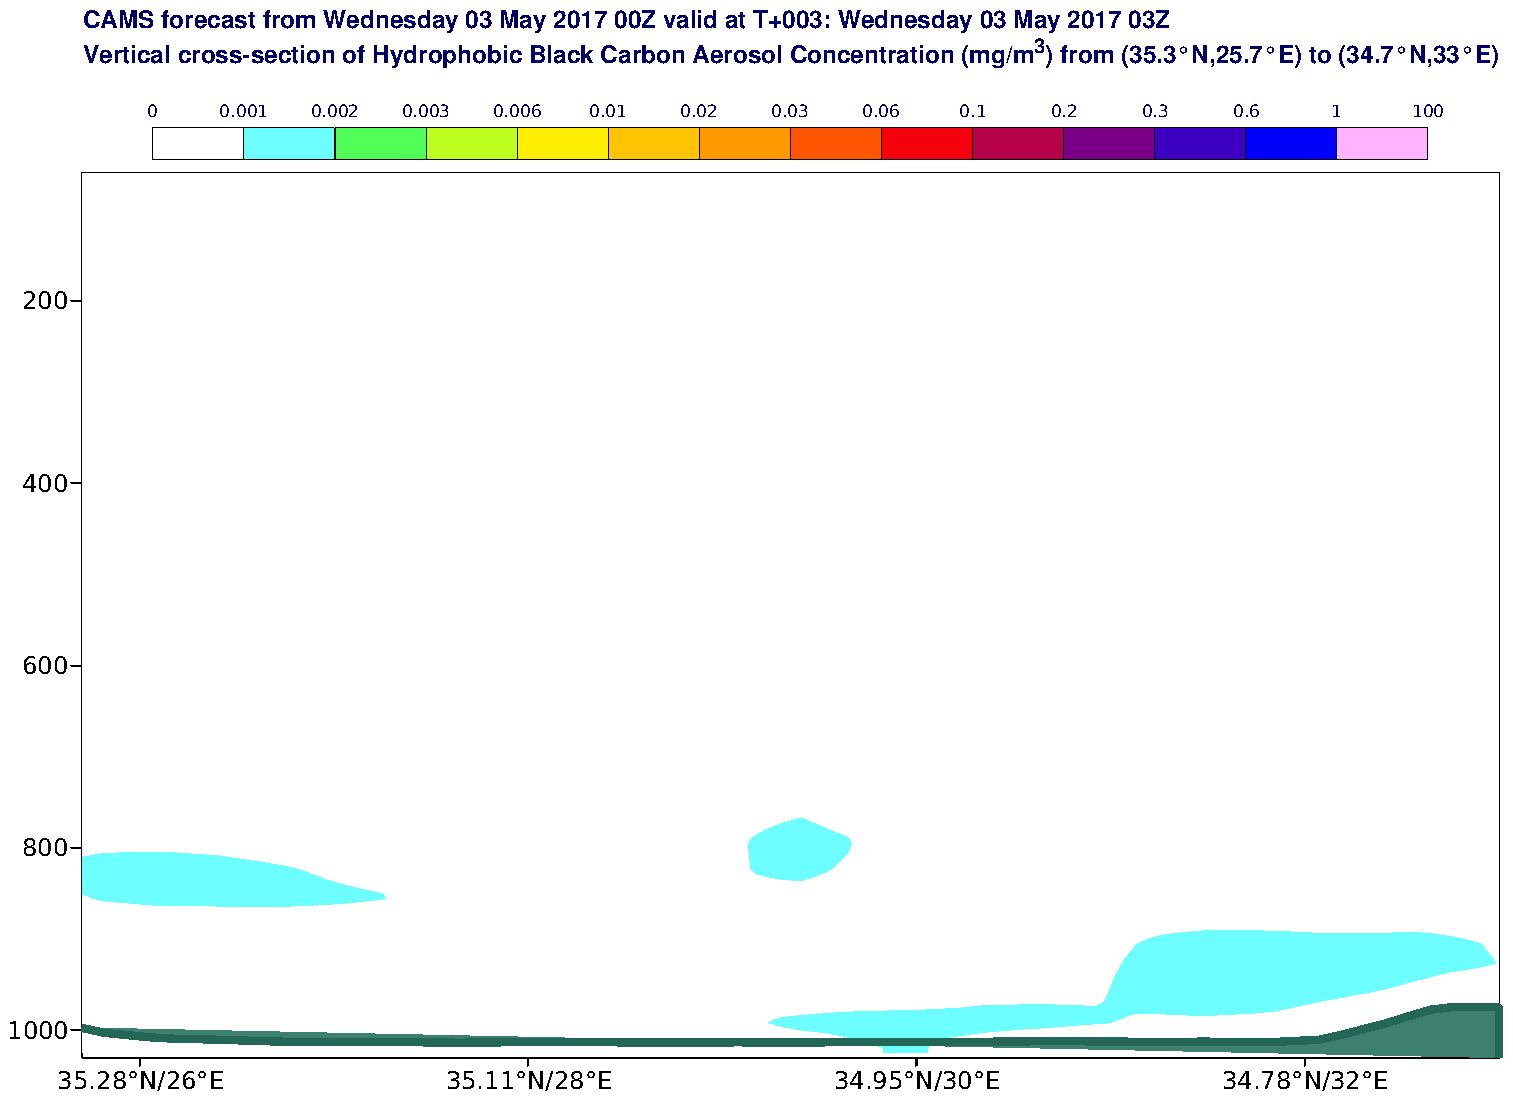 Vertical cross-section of Hydrophobic Black Carbon Aerosol Concentration (mg/m3) valid at T3 - 2017-05-03 03:00